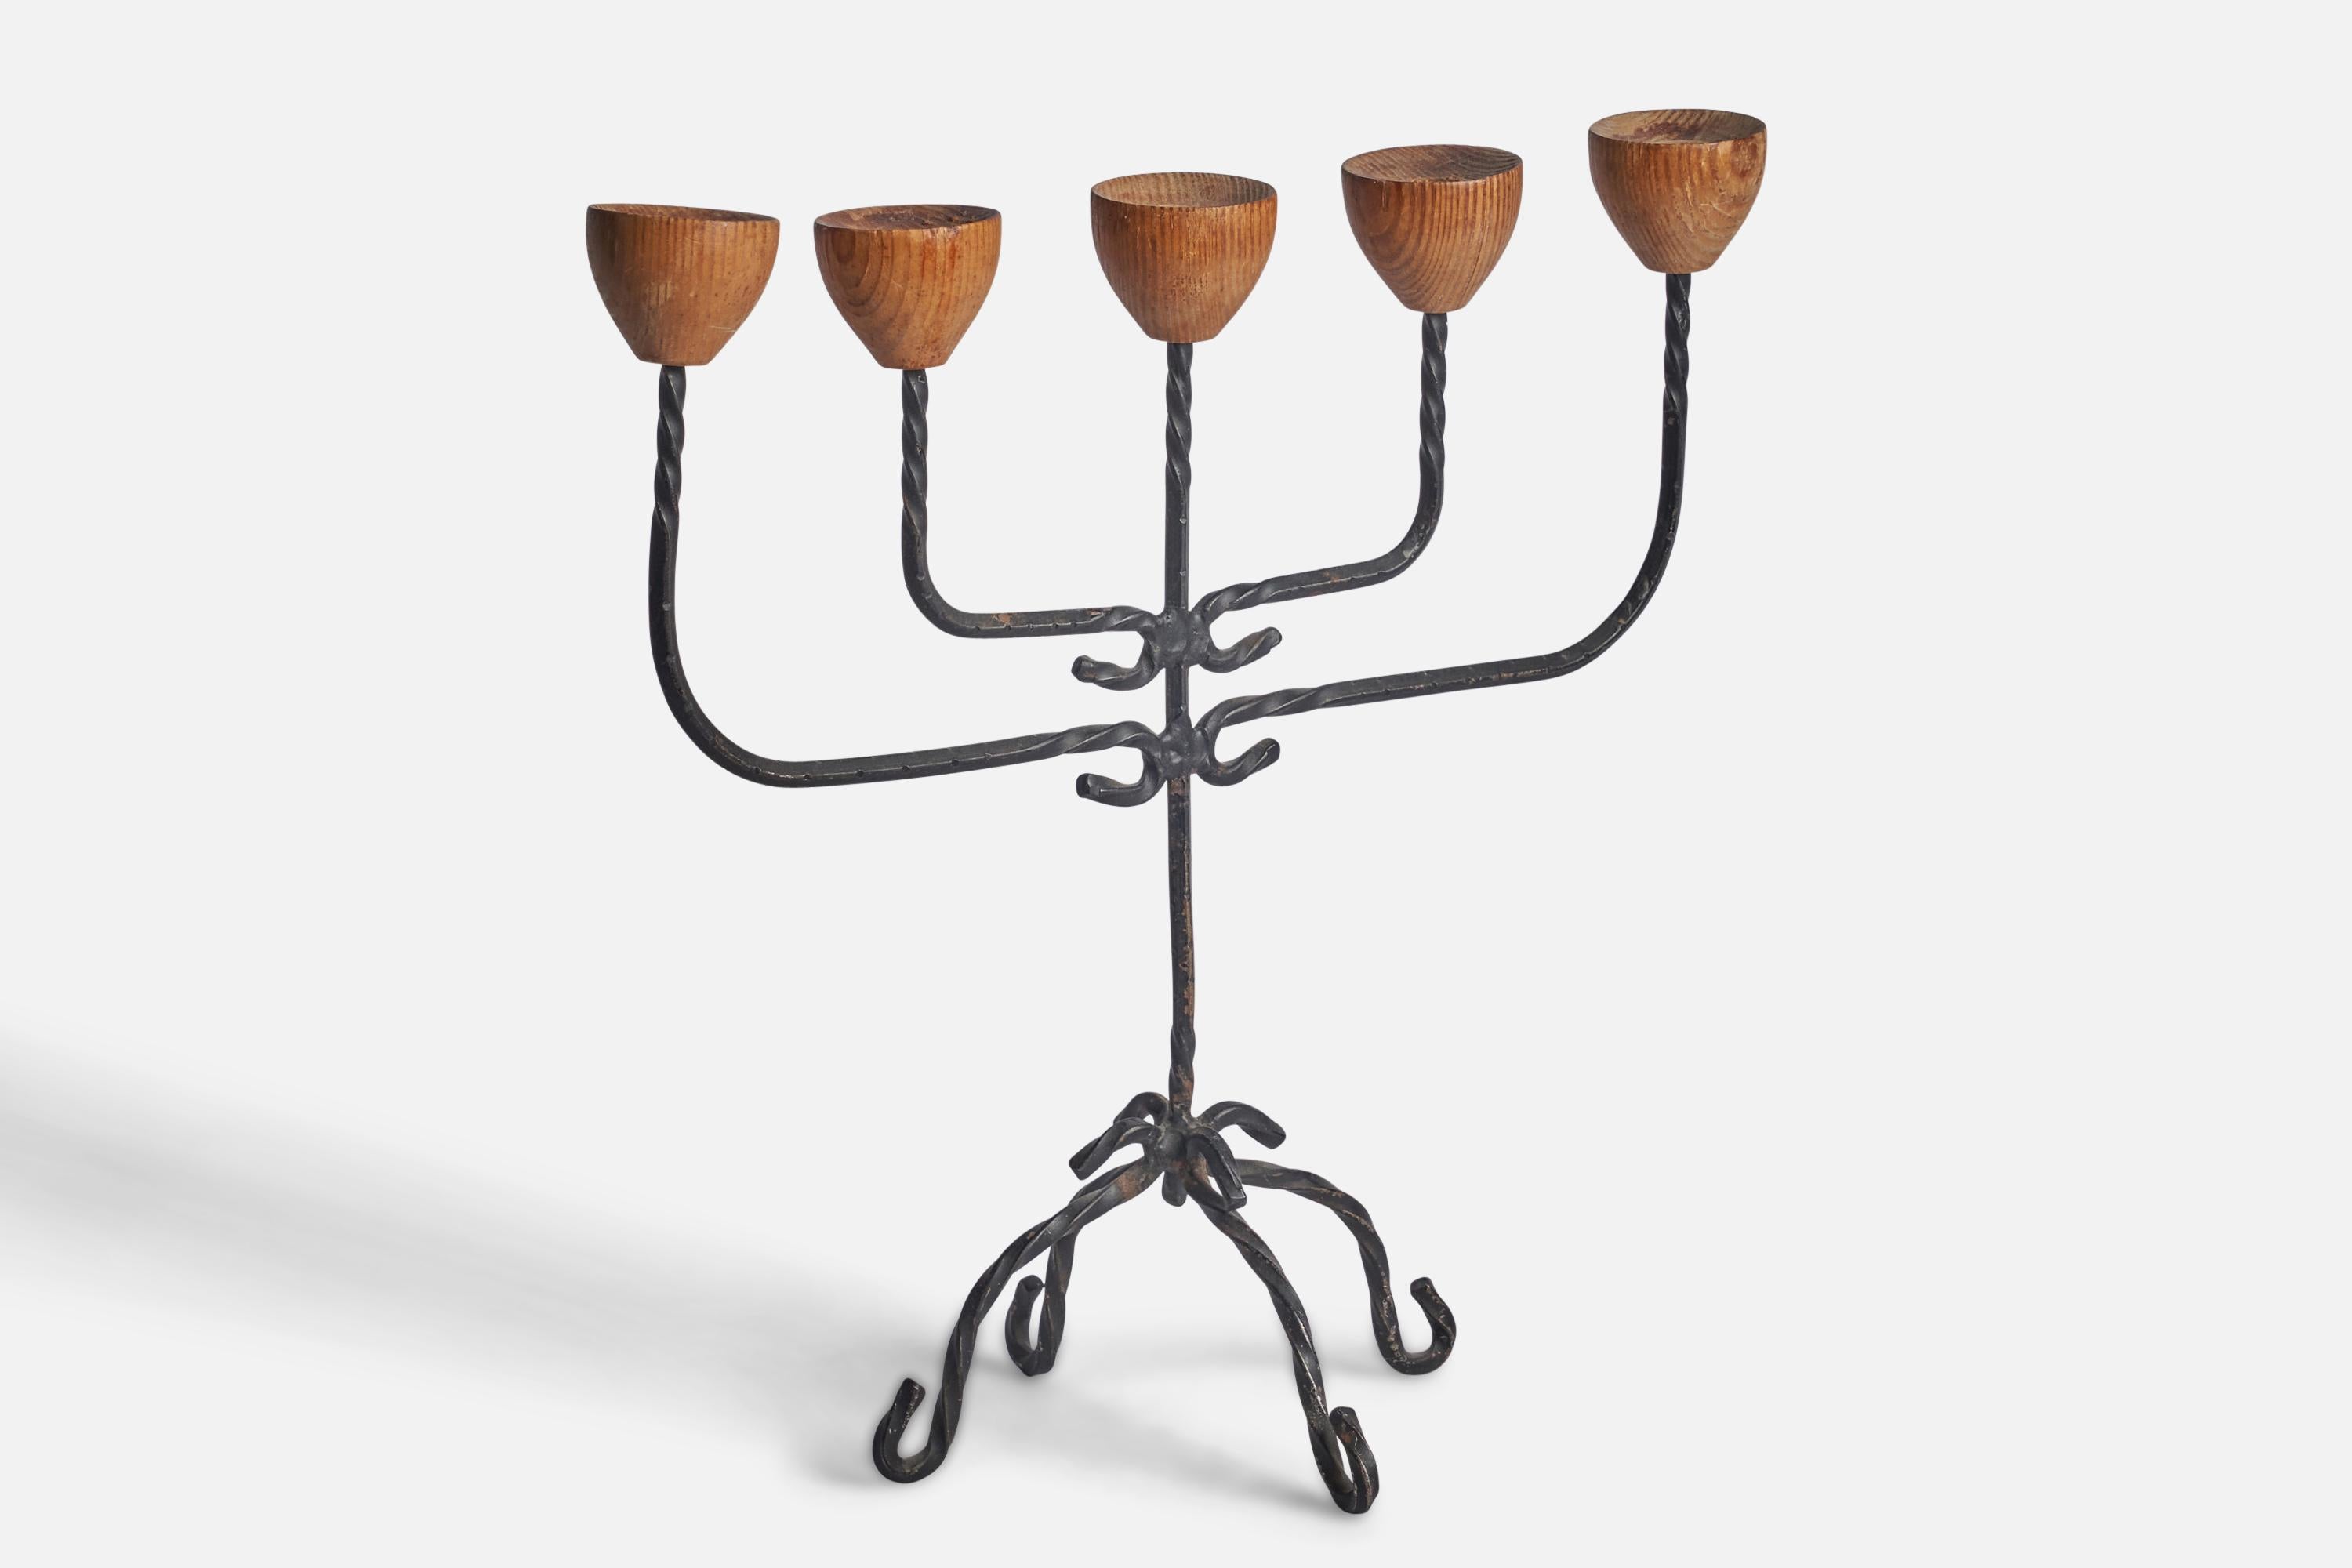 A wrought iron and oak candelabra designed and produced in Sweden, 1960s.

Fits 0.75” diameter candles